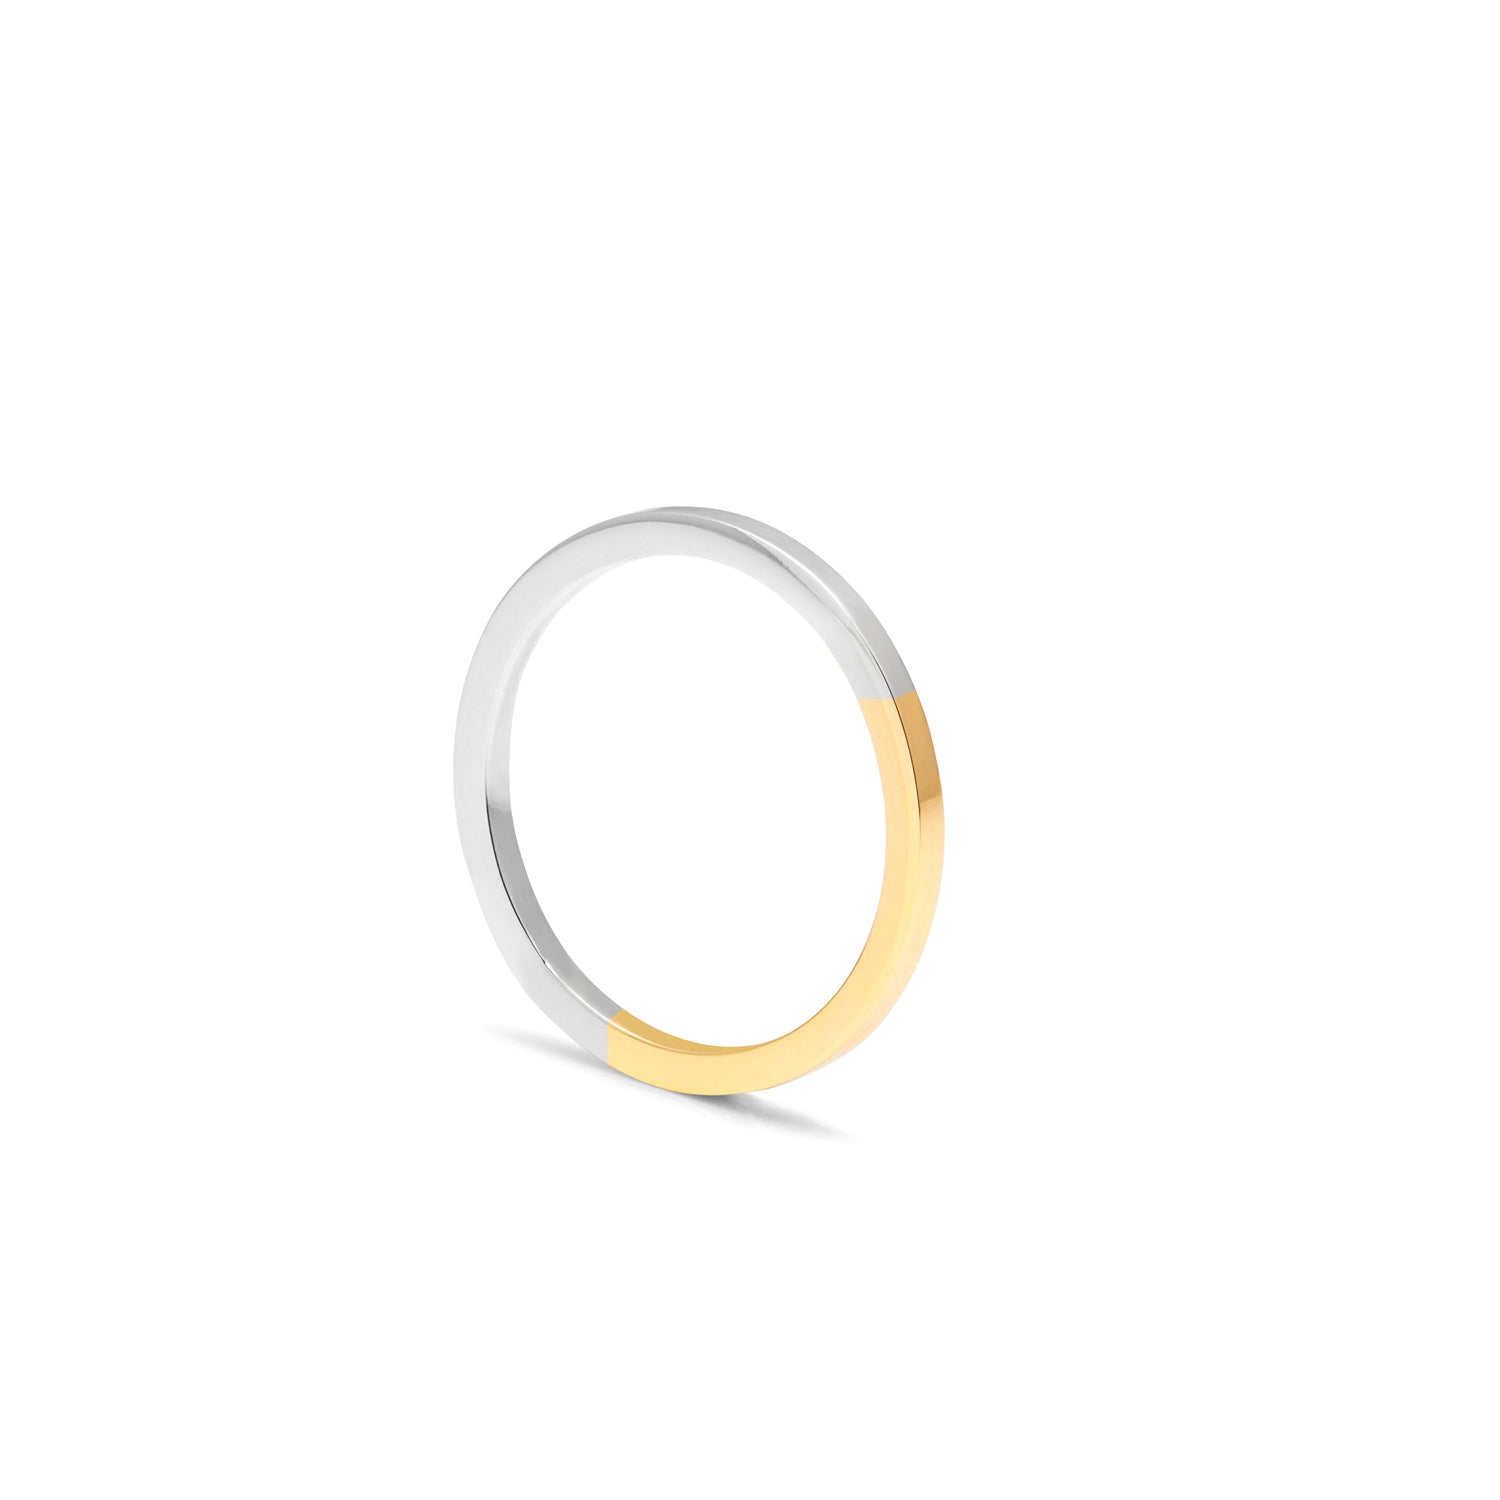 Golden Ratio Square Ring - 9k Yellow & White Gold